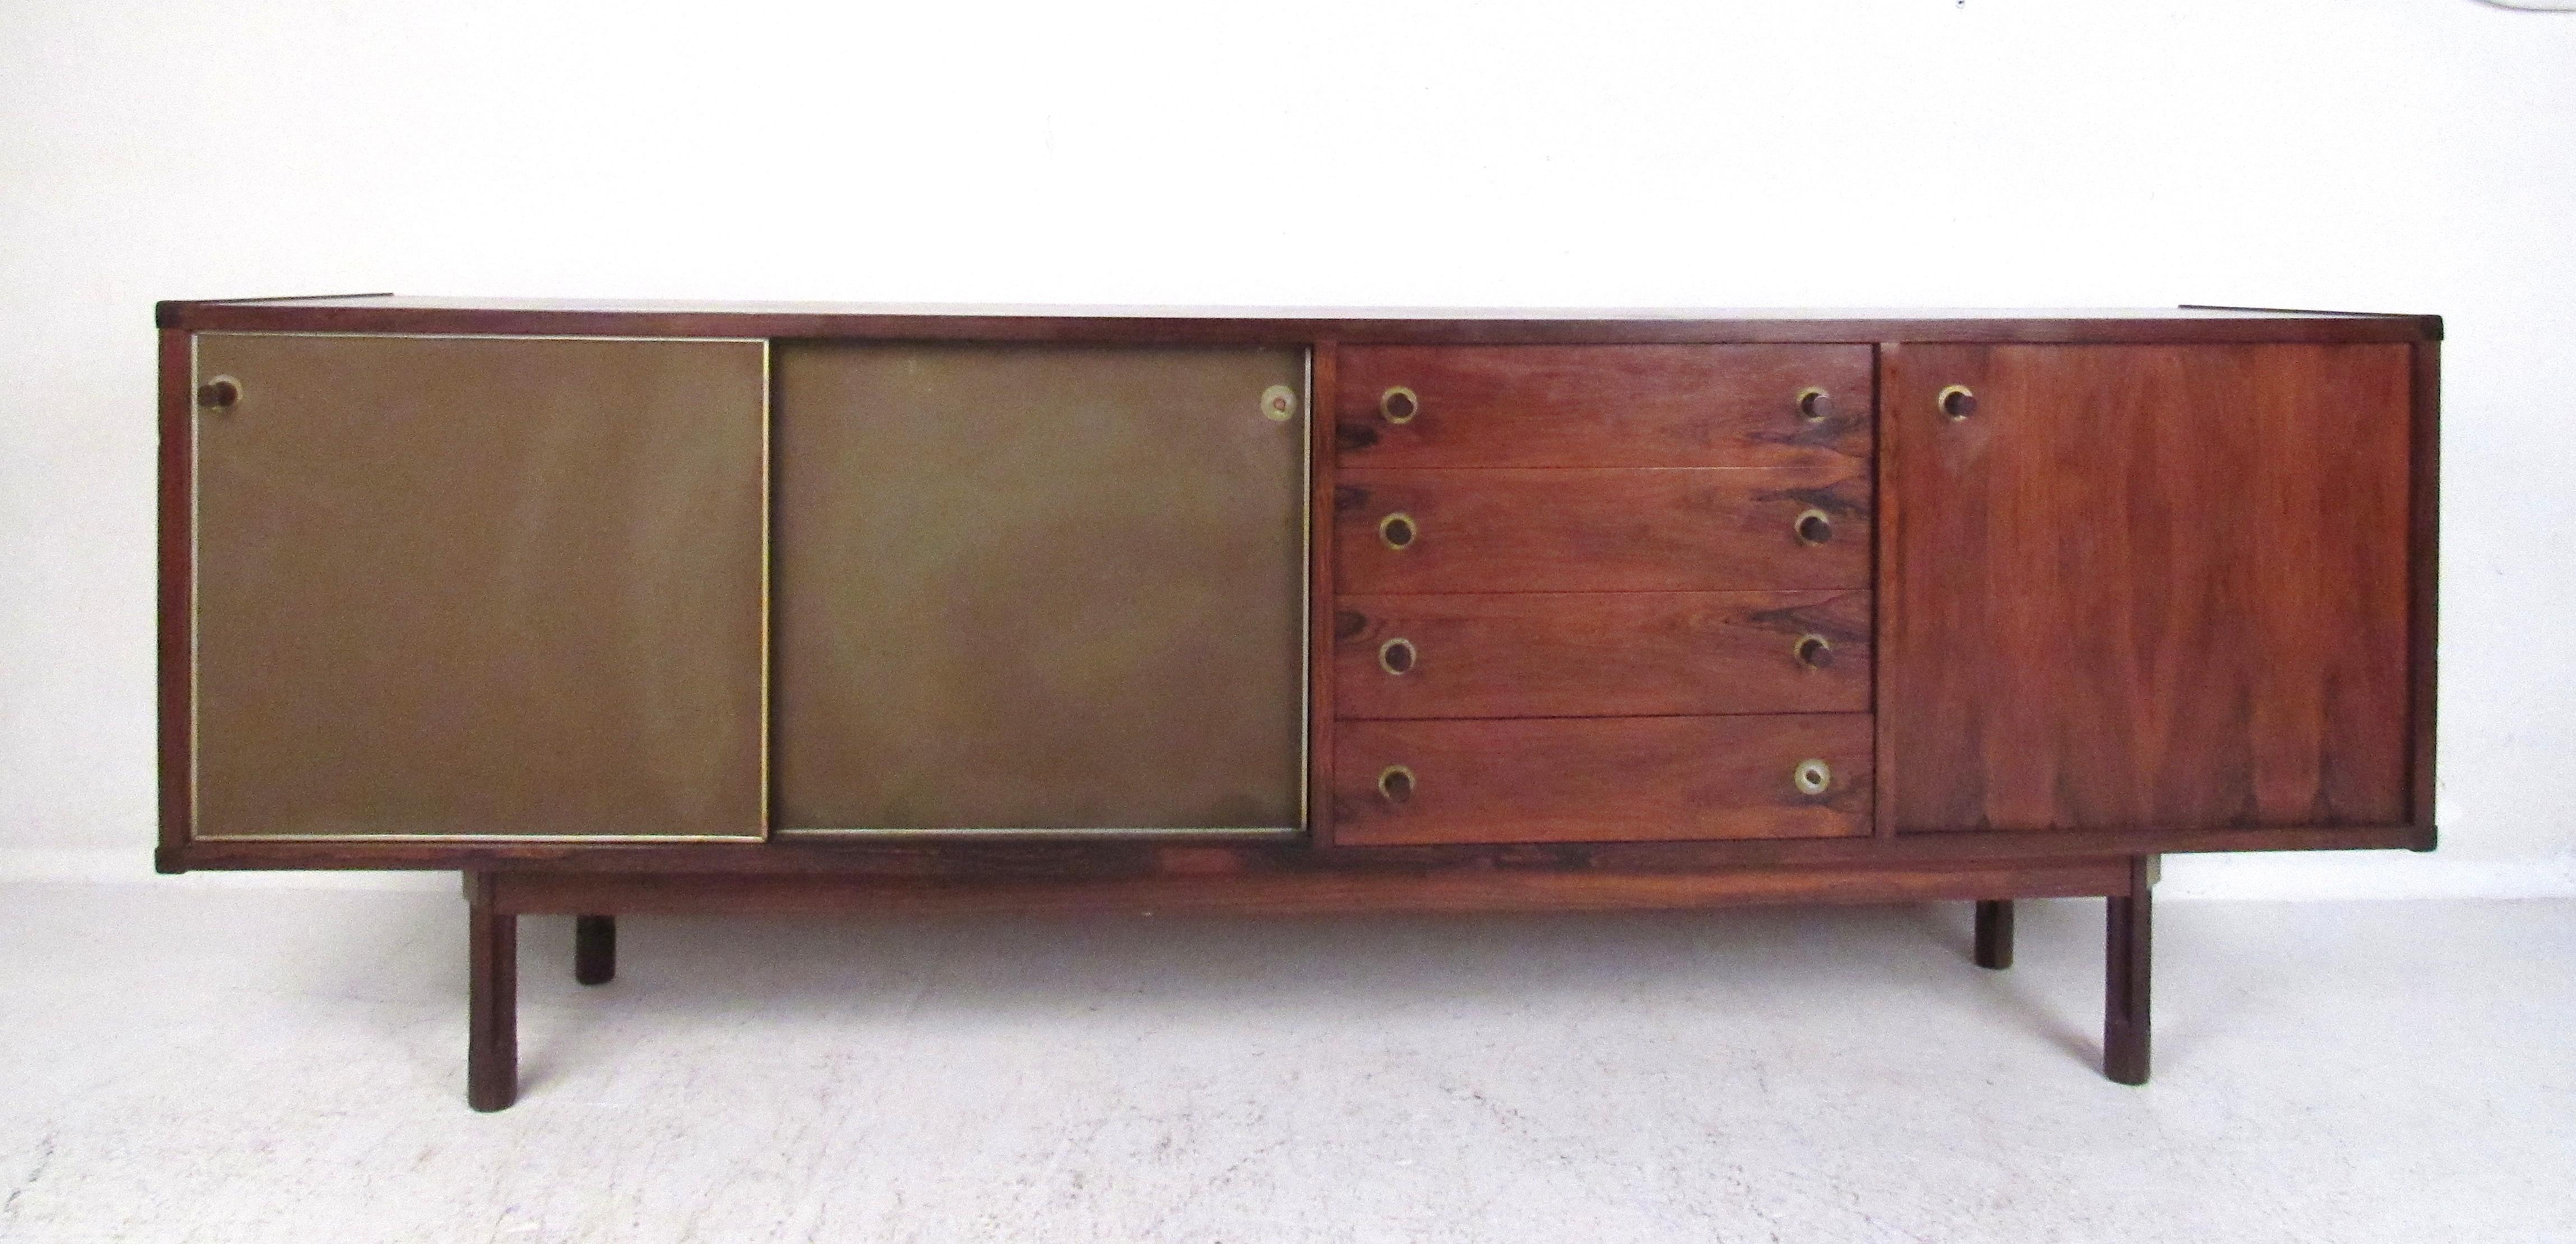 Beautiful midcentury Italian credenza or sideboard covered in a rich rosewood veneer. Sliding cabinet doors along with four drawers in the center offer ample room for storage. The piece's finished back allows it to be admired from all angles. Please